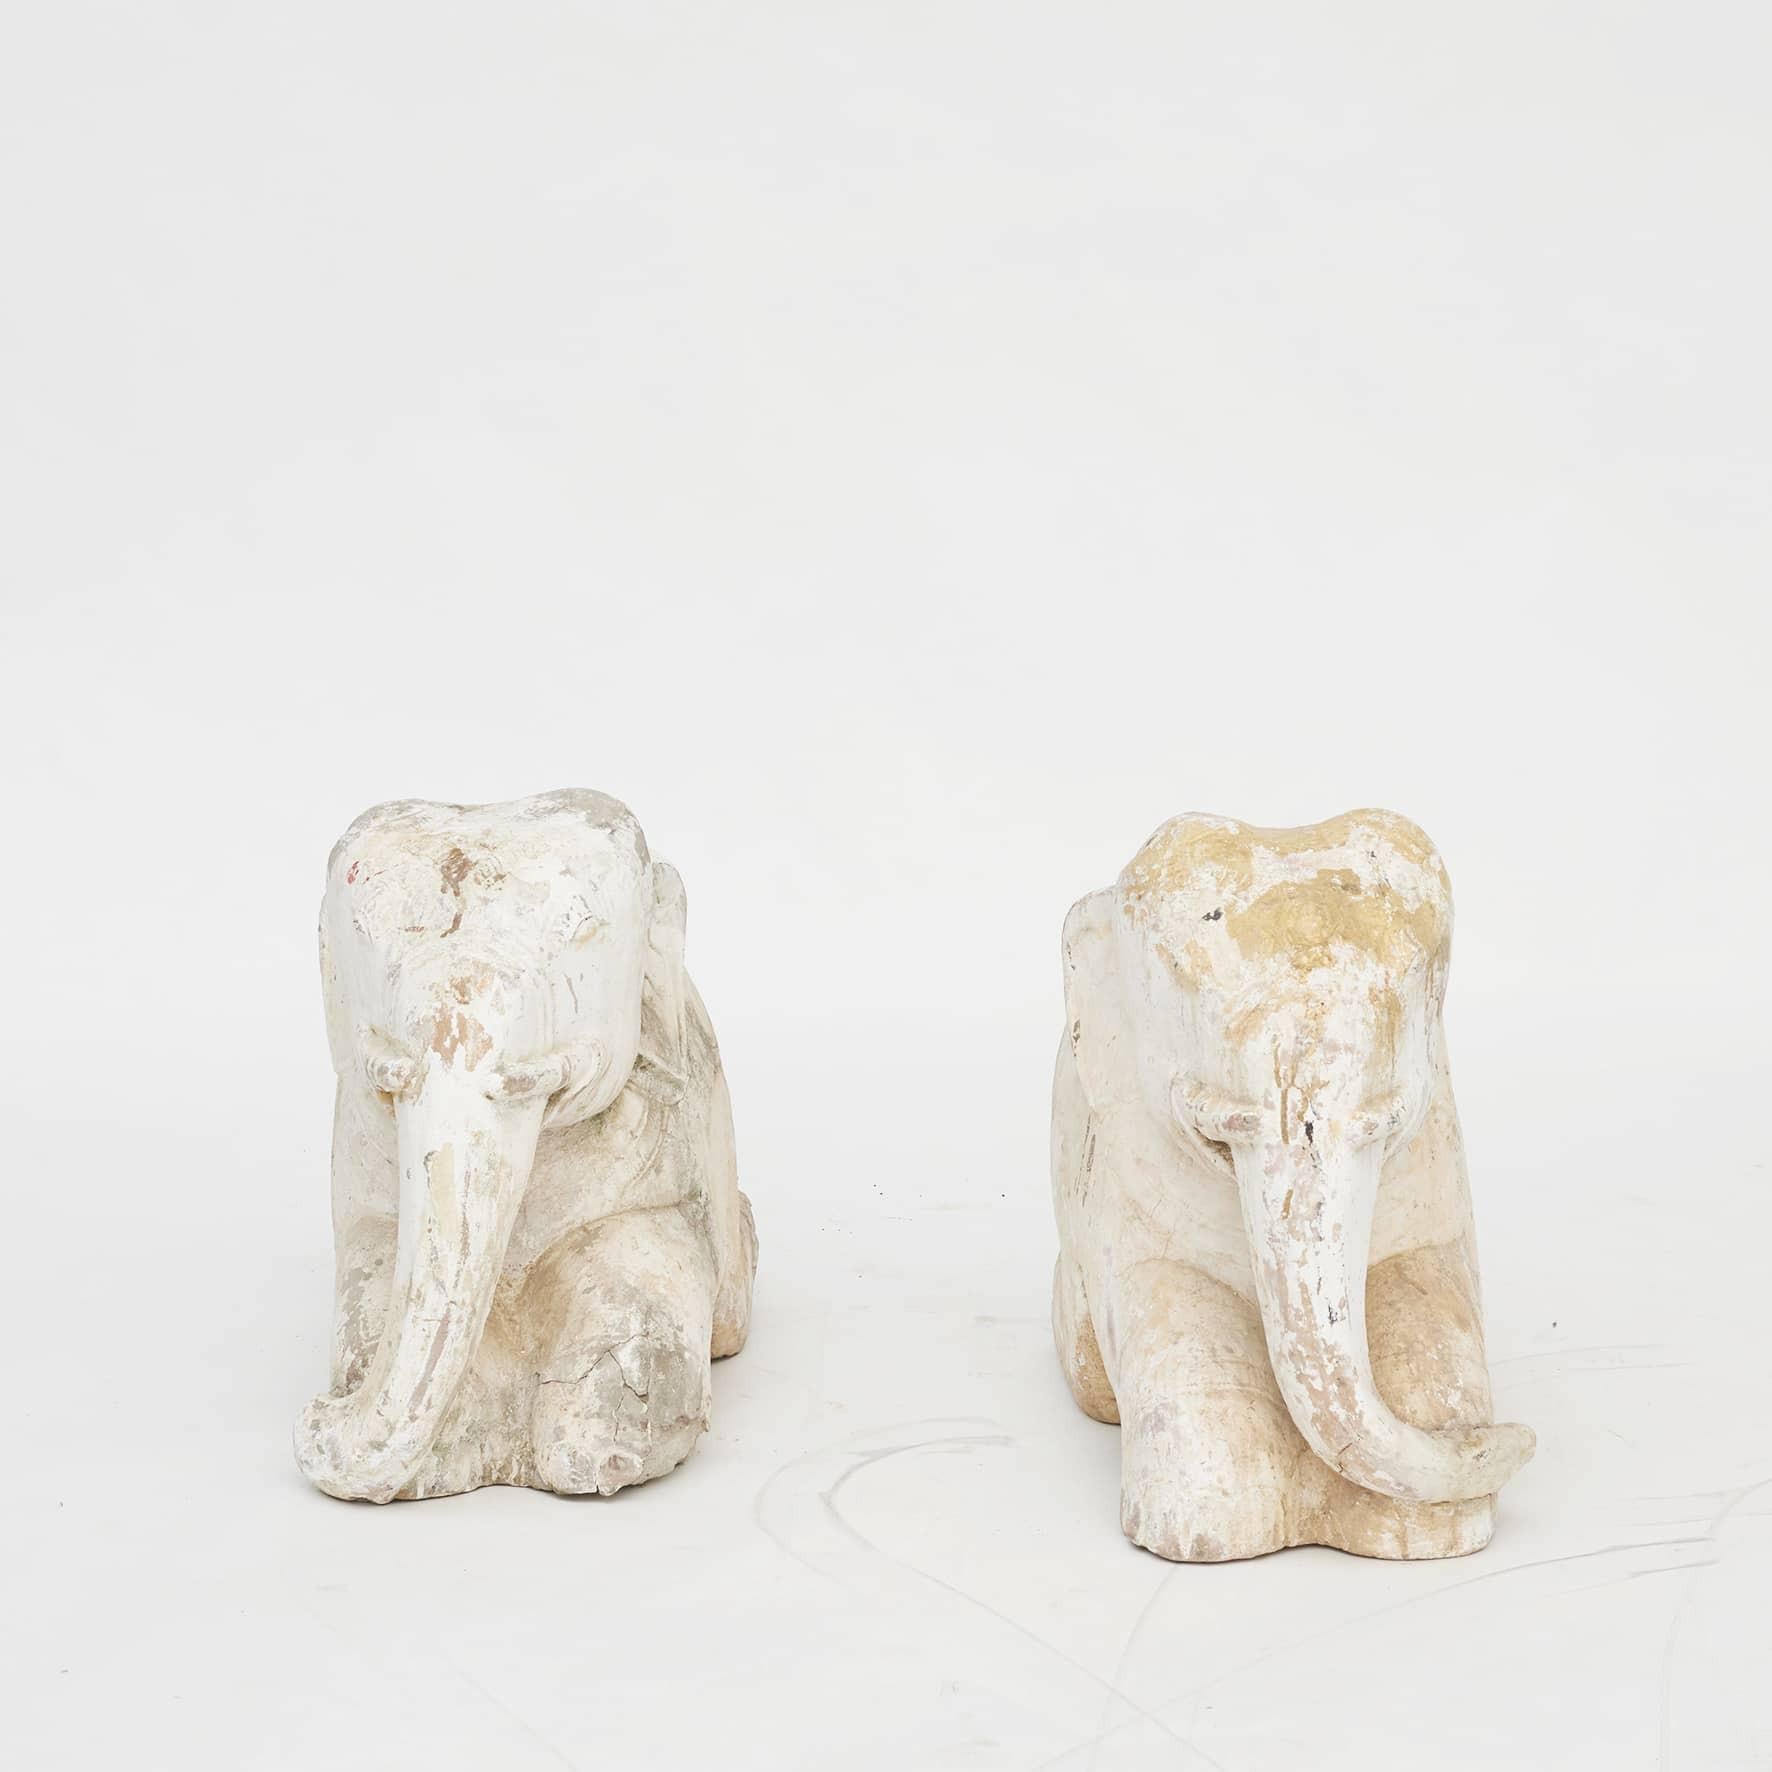 Pair of rare 18th century temple elephants carved in sandstone with chalk and leftovers of gold leaf.
Chalking is used as a surface to bind gold leaf. Originally fully covered with gold leaf.
Elephants have a God status and are the guardians of the